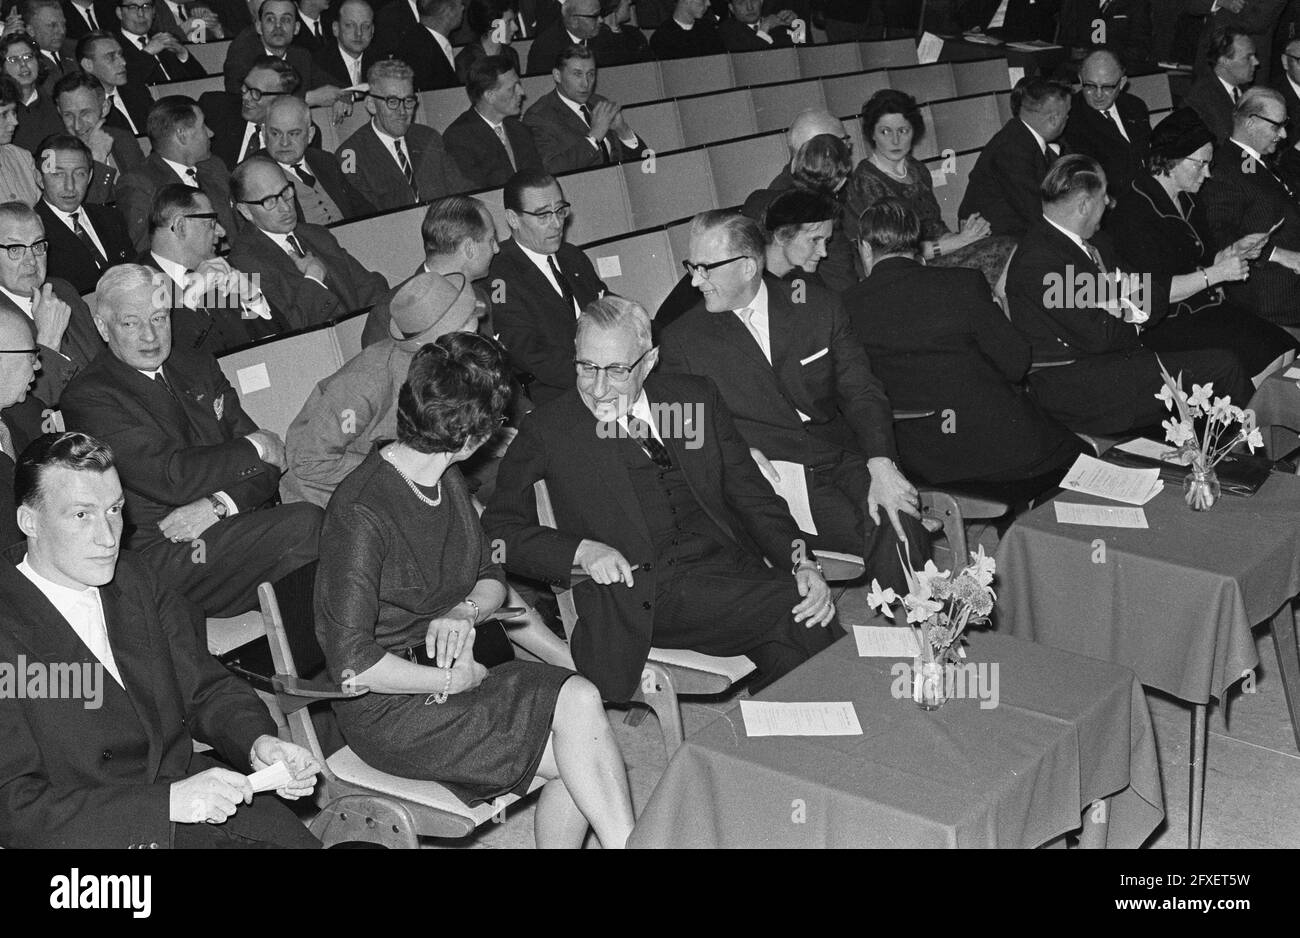 Tenth Overijssel Appeal of the KVP held in Hengelo Minister J. Cals with Mr. M. Klompe of Social Affairs, February 3, 1963, The Netherlands, 20th century press agency photo, news to remember, documentary, historic photography 1945-1990, visual stories, human history of the Twentieth Century, capturing moments in time Stock Photo